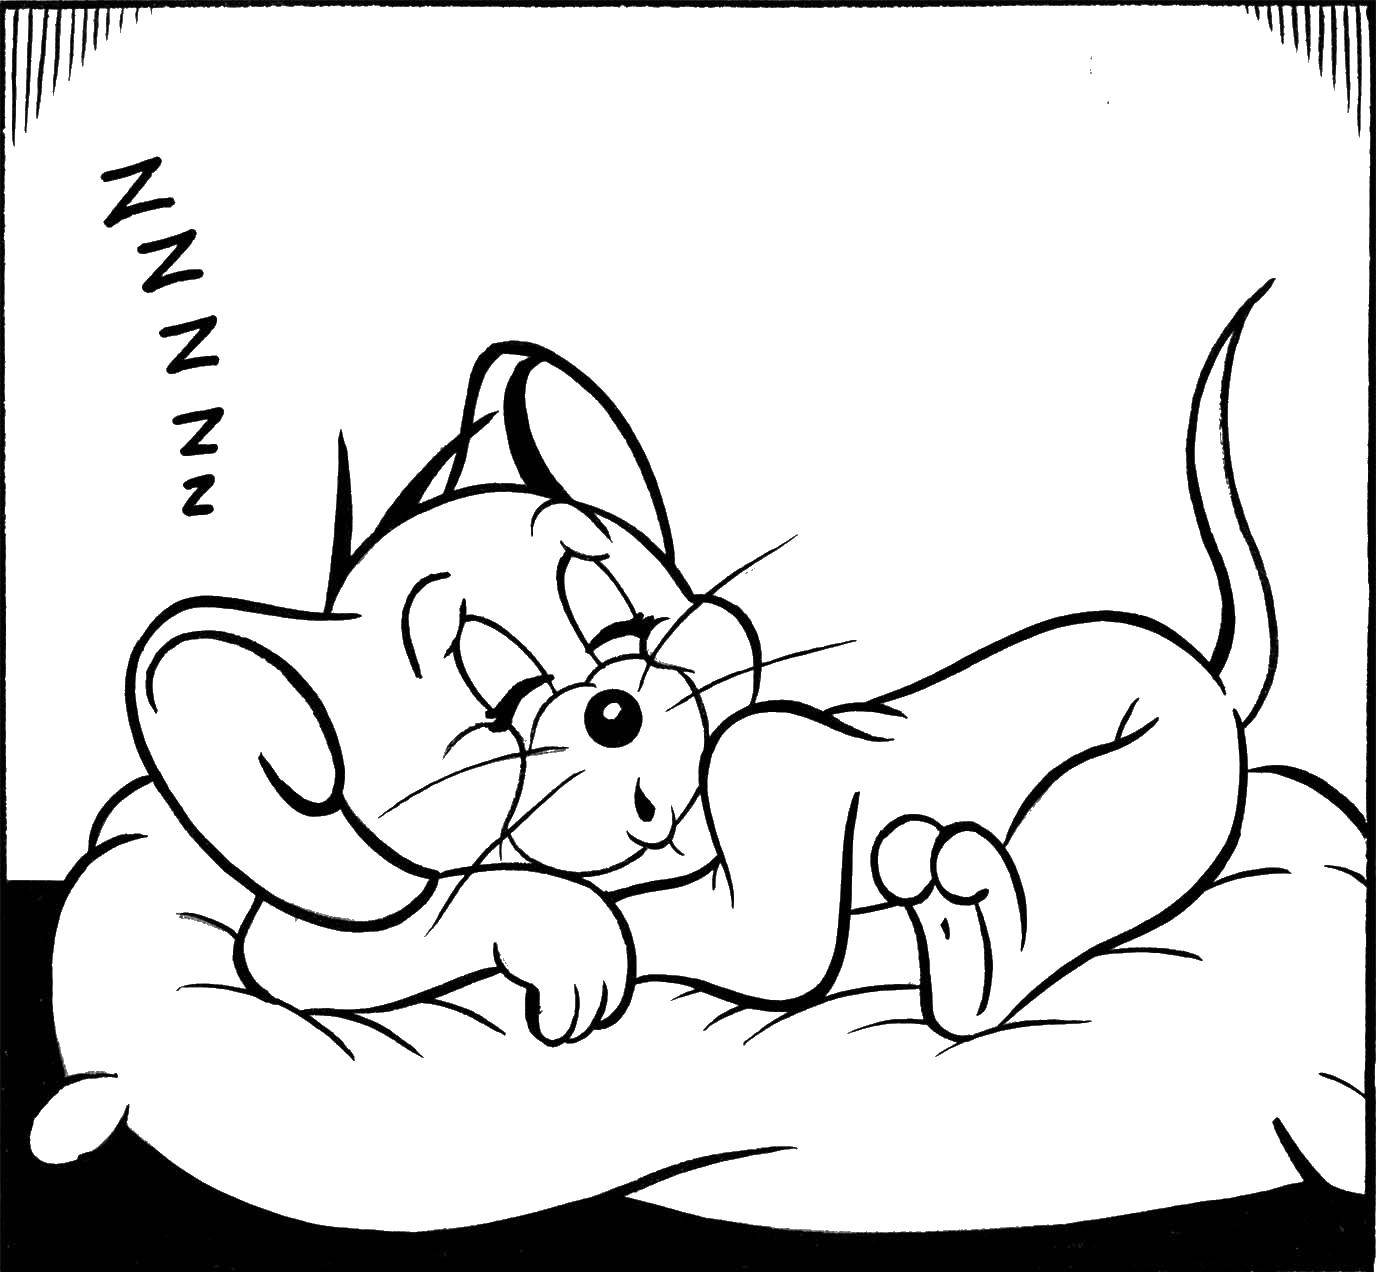 Coloring Jerry is sleeping. Category cartoons. Tags:  Character cartoon, Tom and Jerry.